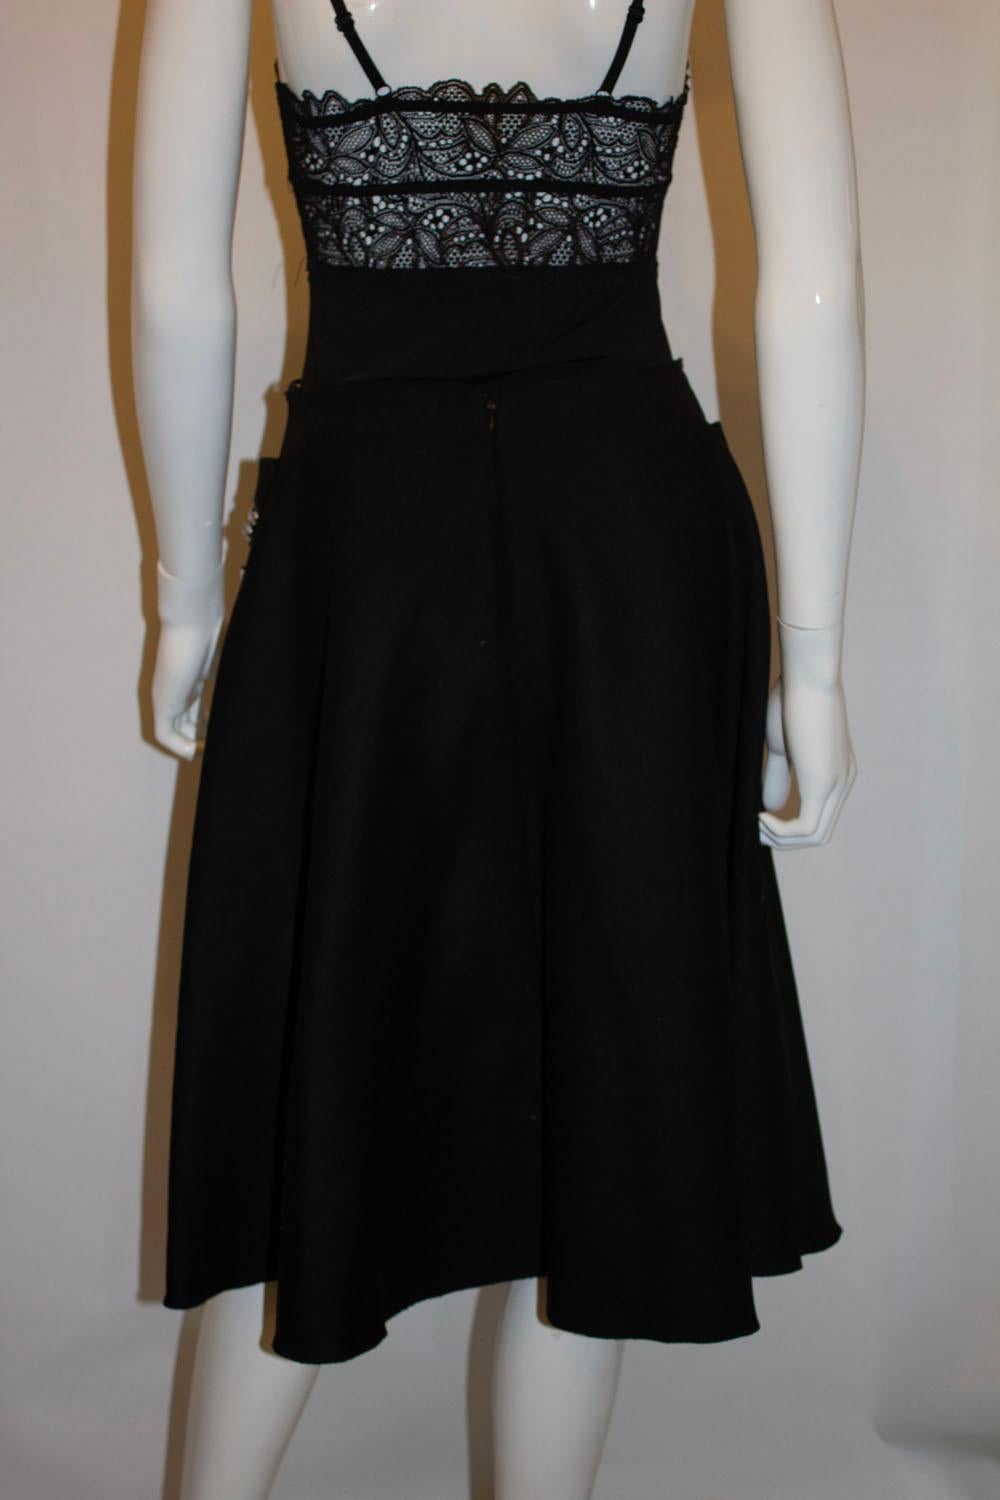 A stunning skirt by Prada. The skirt is in black wool with two pockets  , a back central zip and is not lined. The embellishments on the front are stunning.
Size 42  measurements waist 27    length 25
